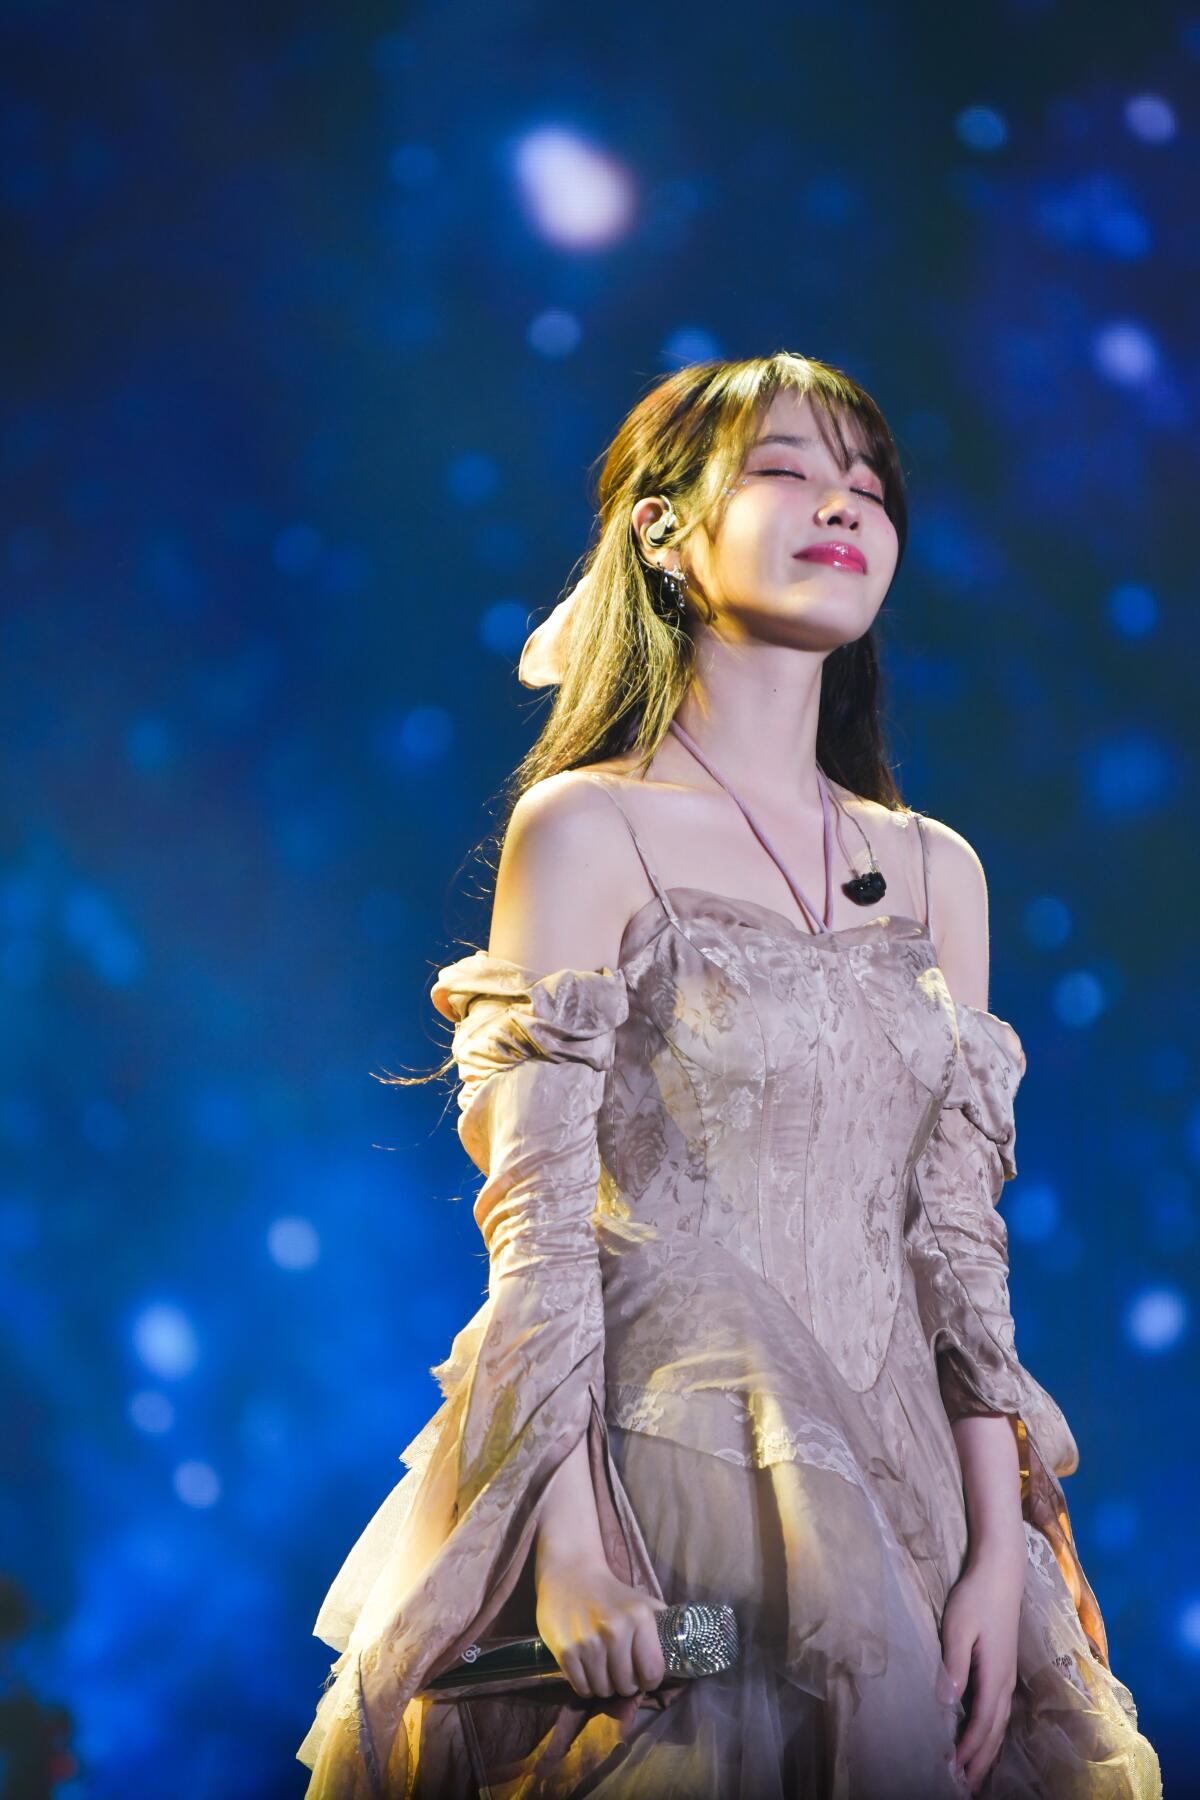 IU wears a dress and beams from the stage.